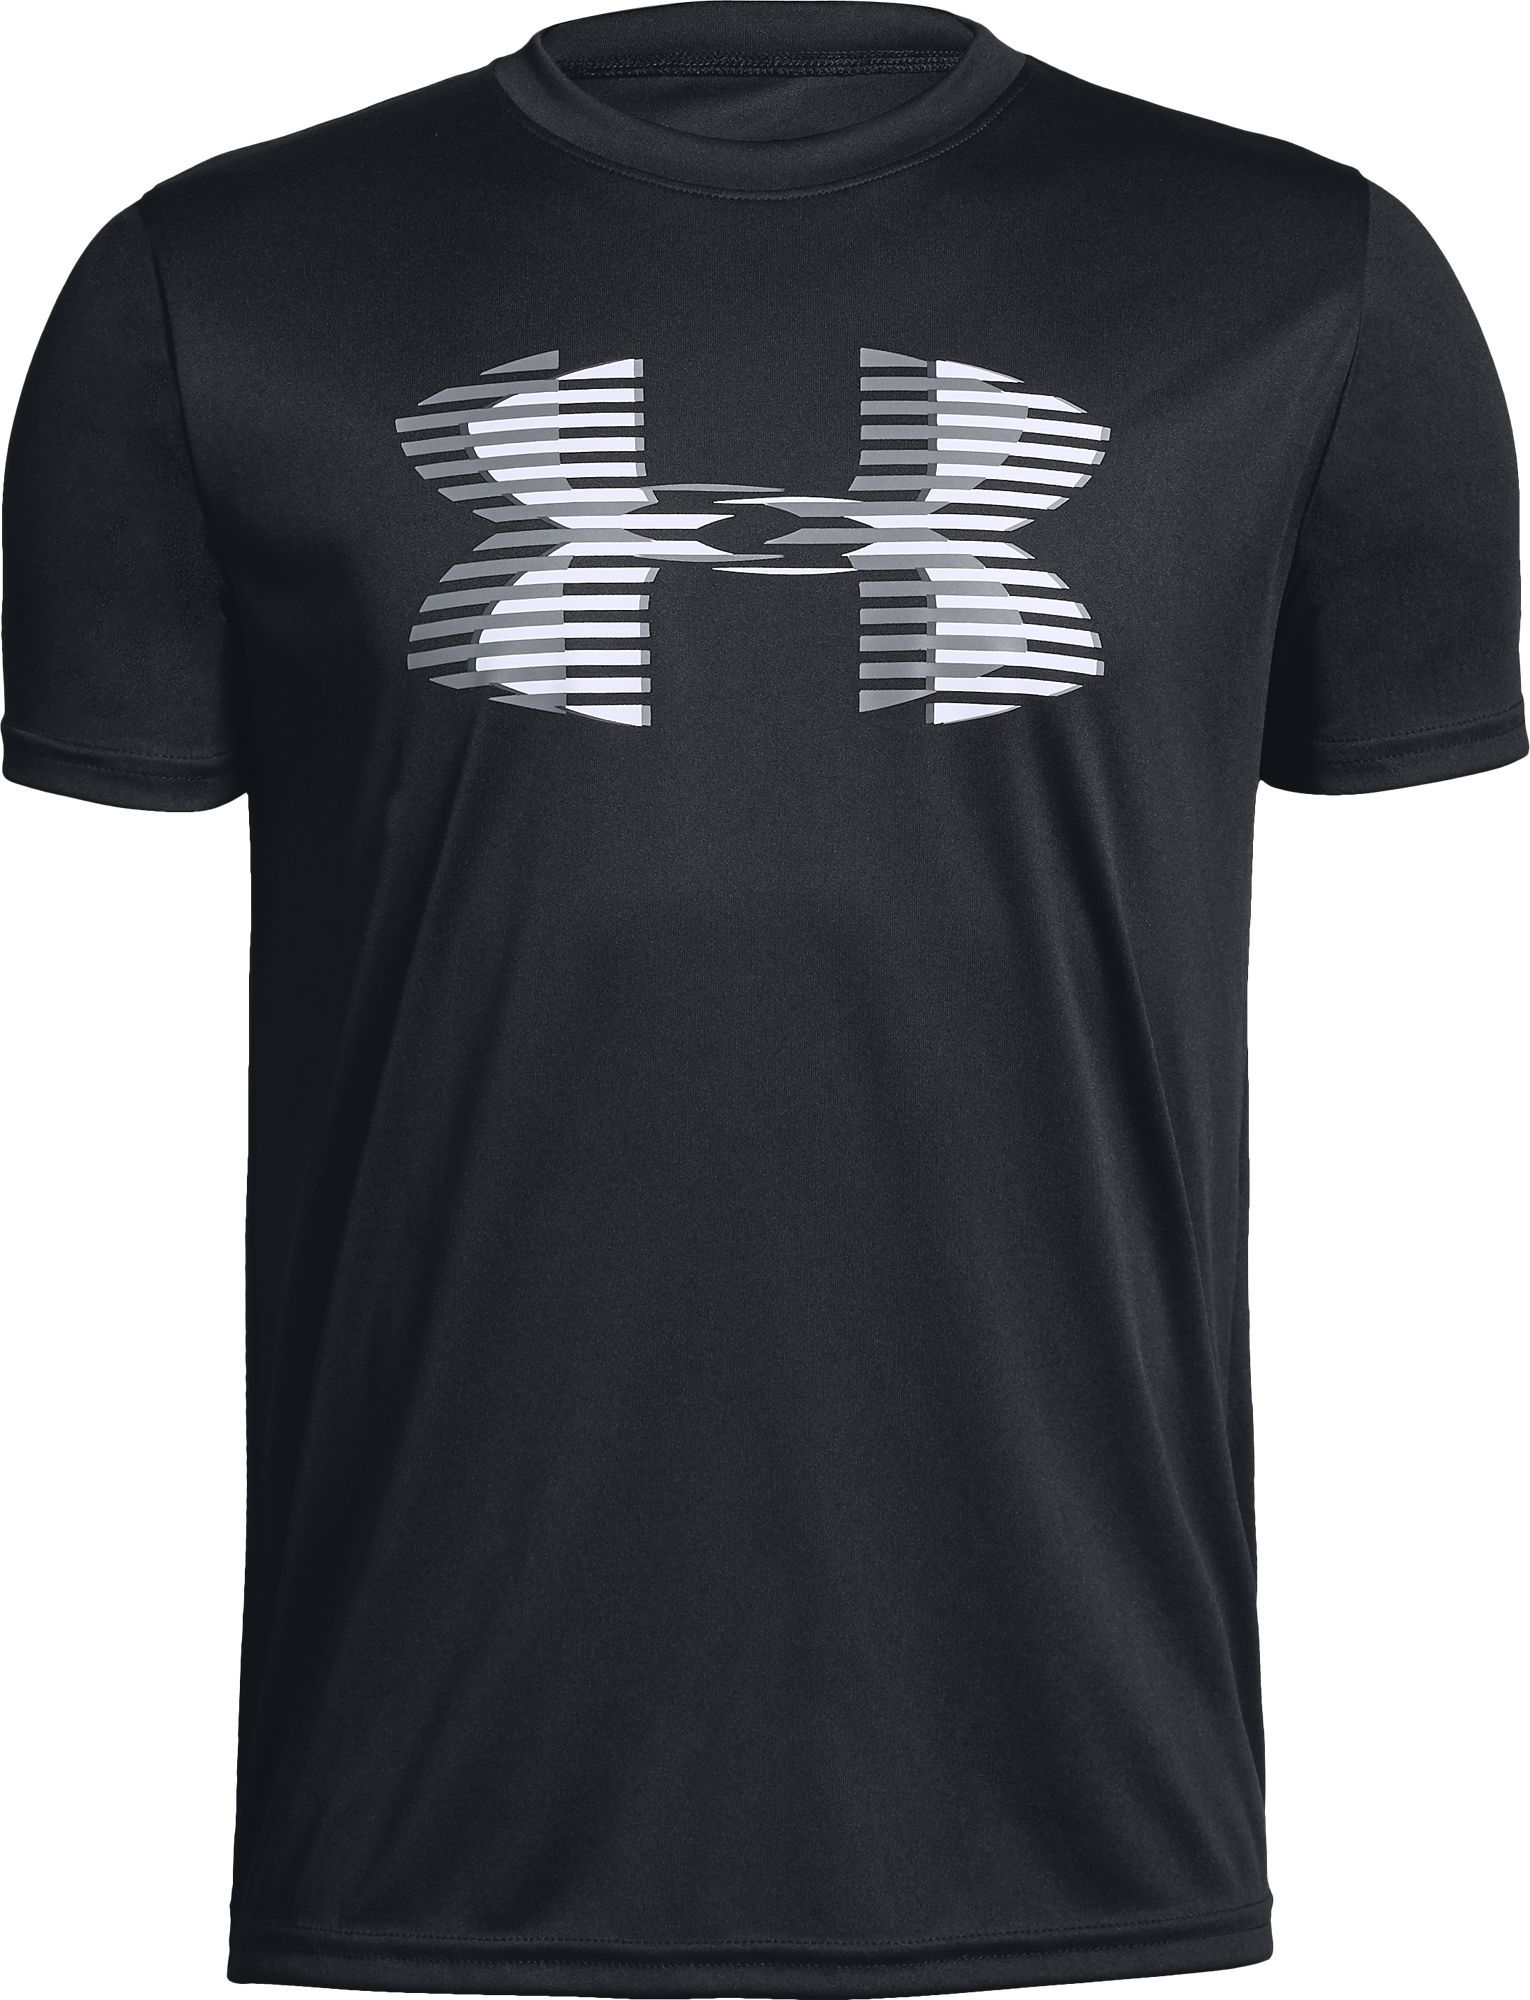 Why Are Under Armour Shirts So Popular?